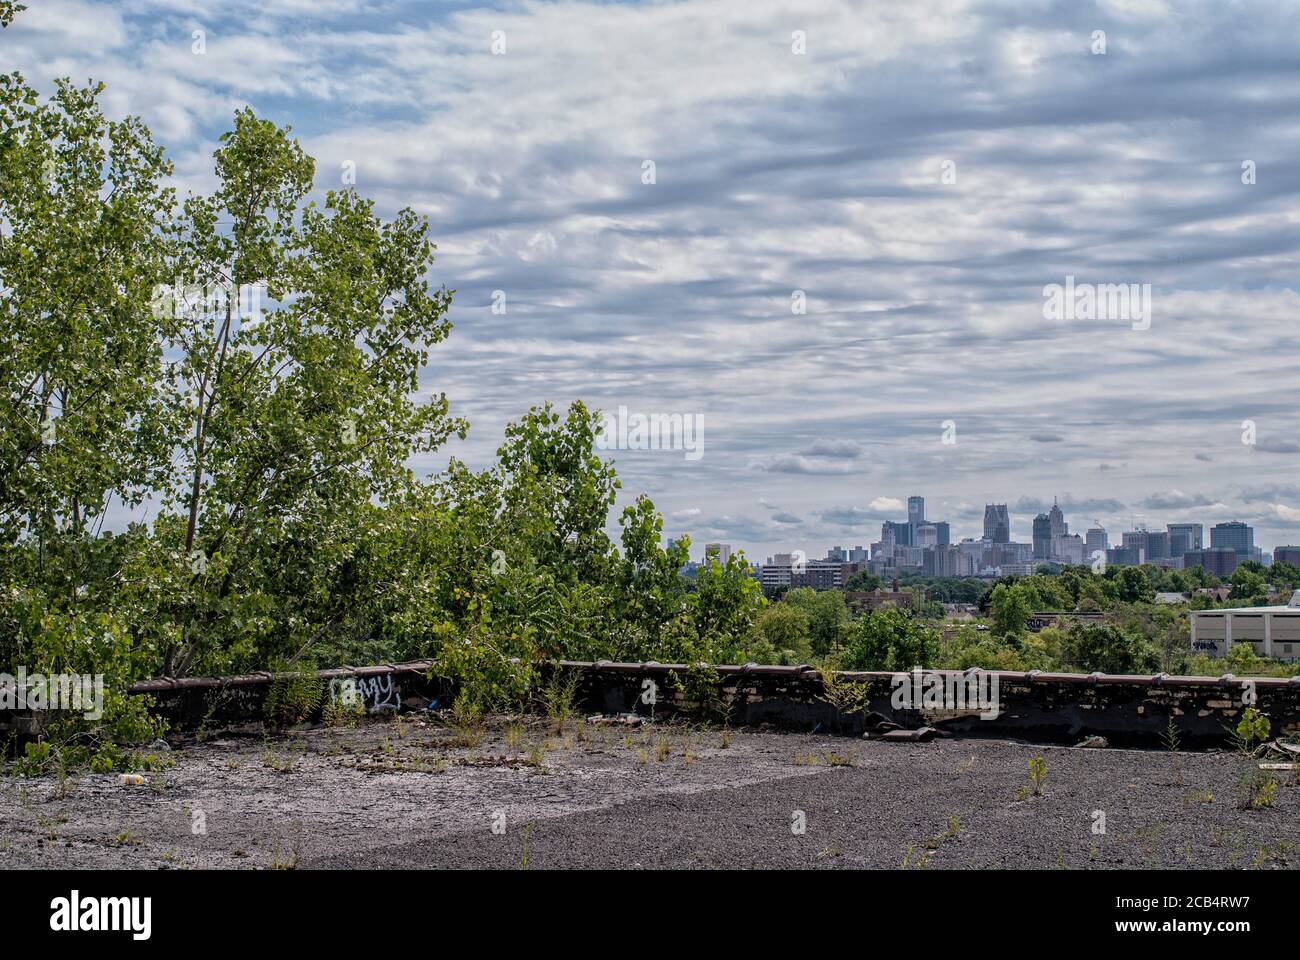 North America - United States, Detroit:  A view of downtown Detroit from an abandoned building. Stock Photo